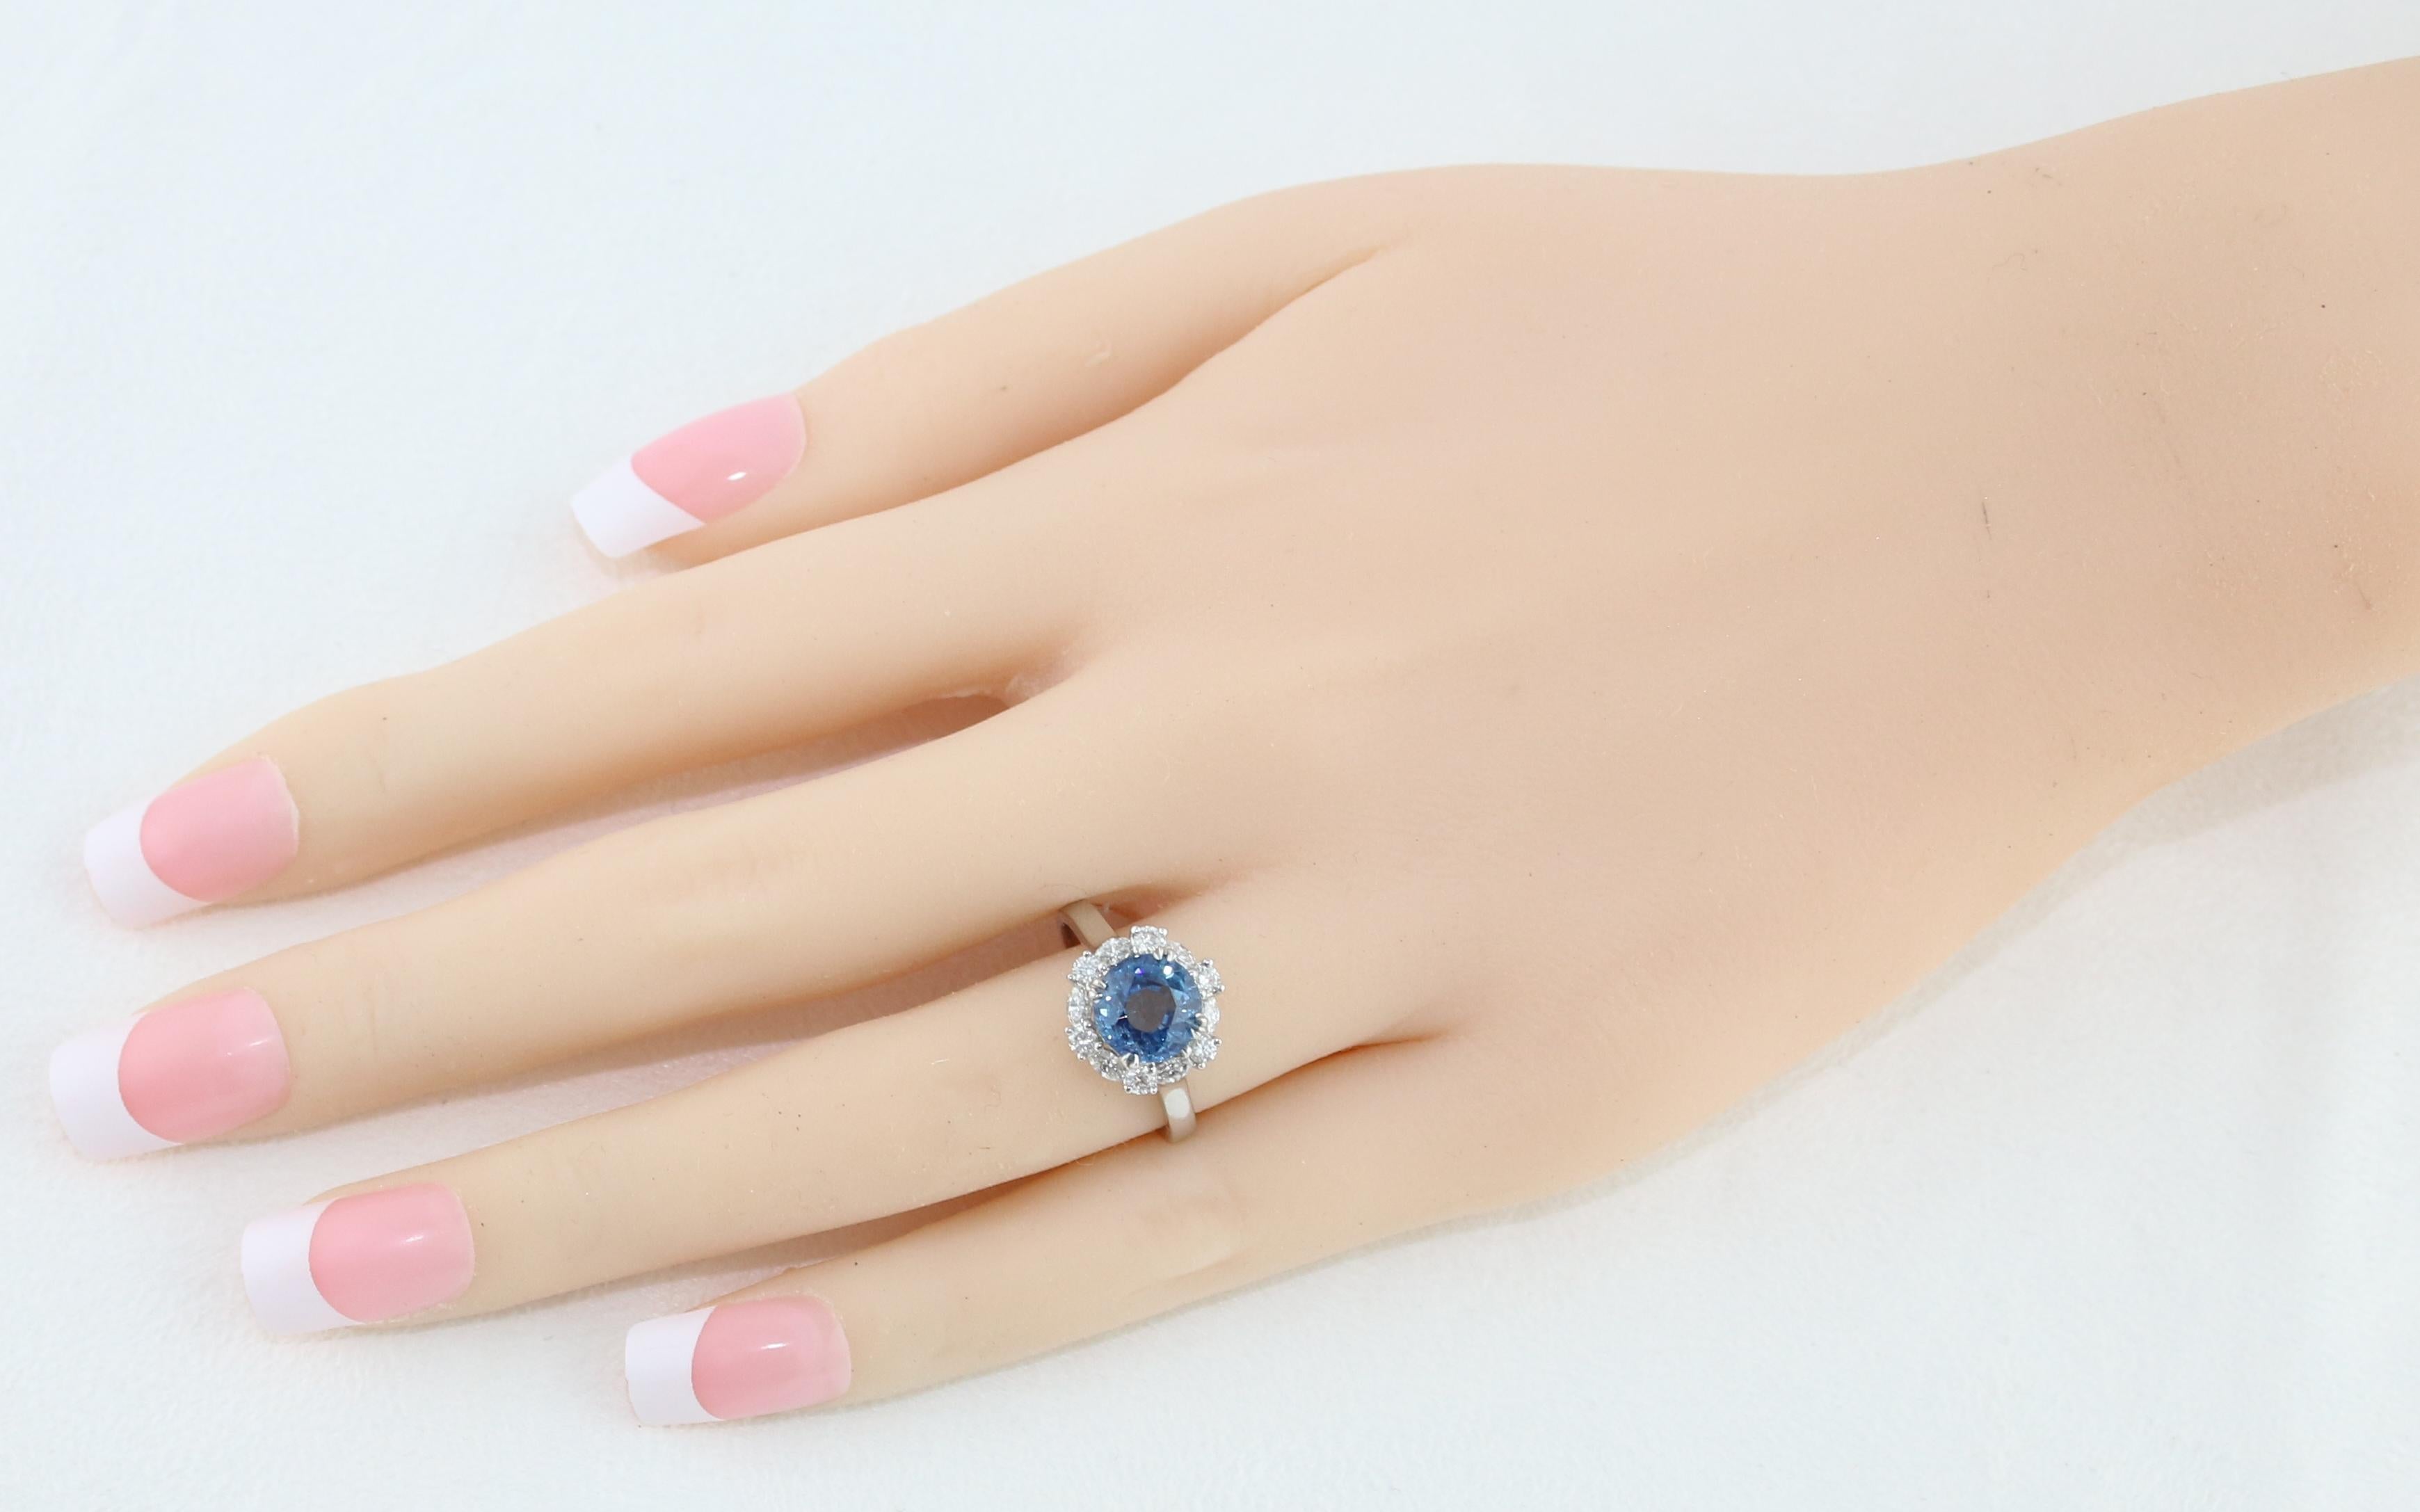 Contemporary Certified No Heat 2.97 Carat Sky Blue Sapphire Halo Diamond Ring For Sale